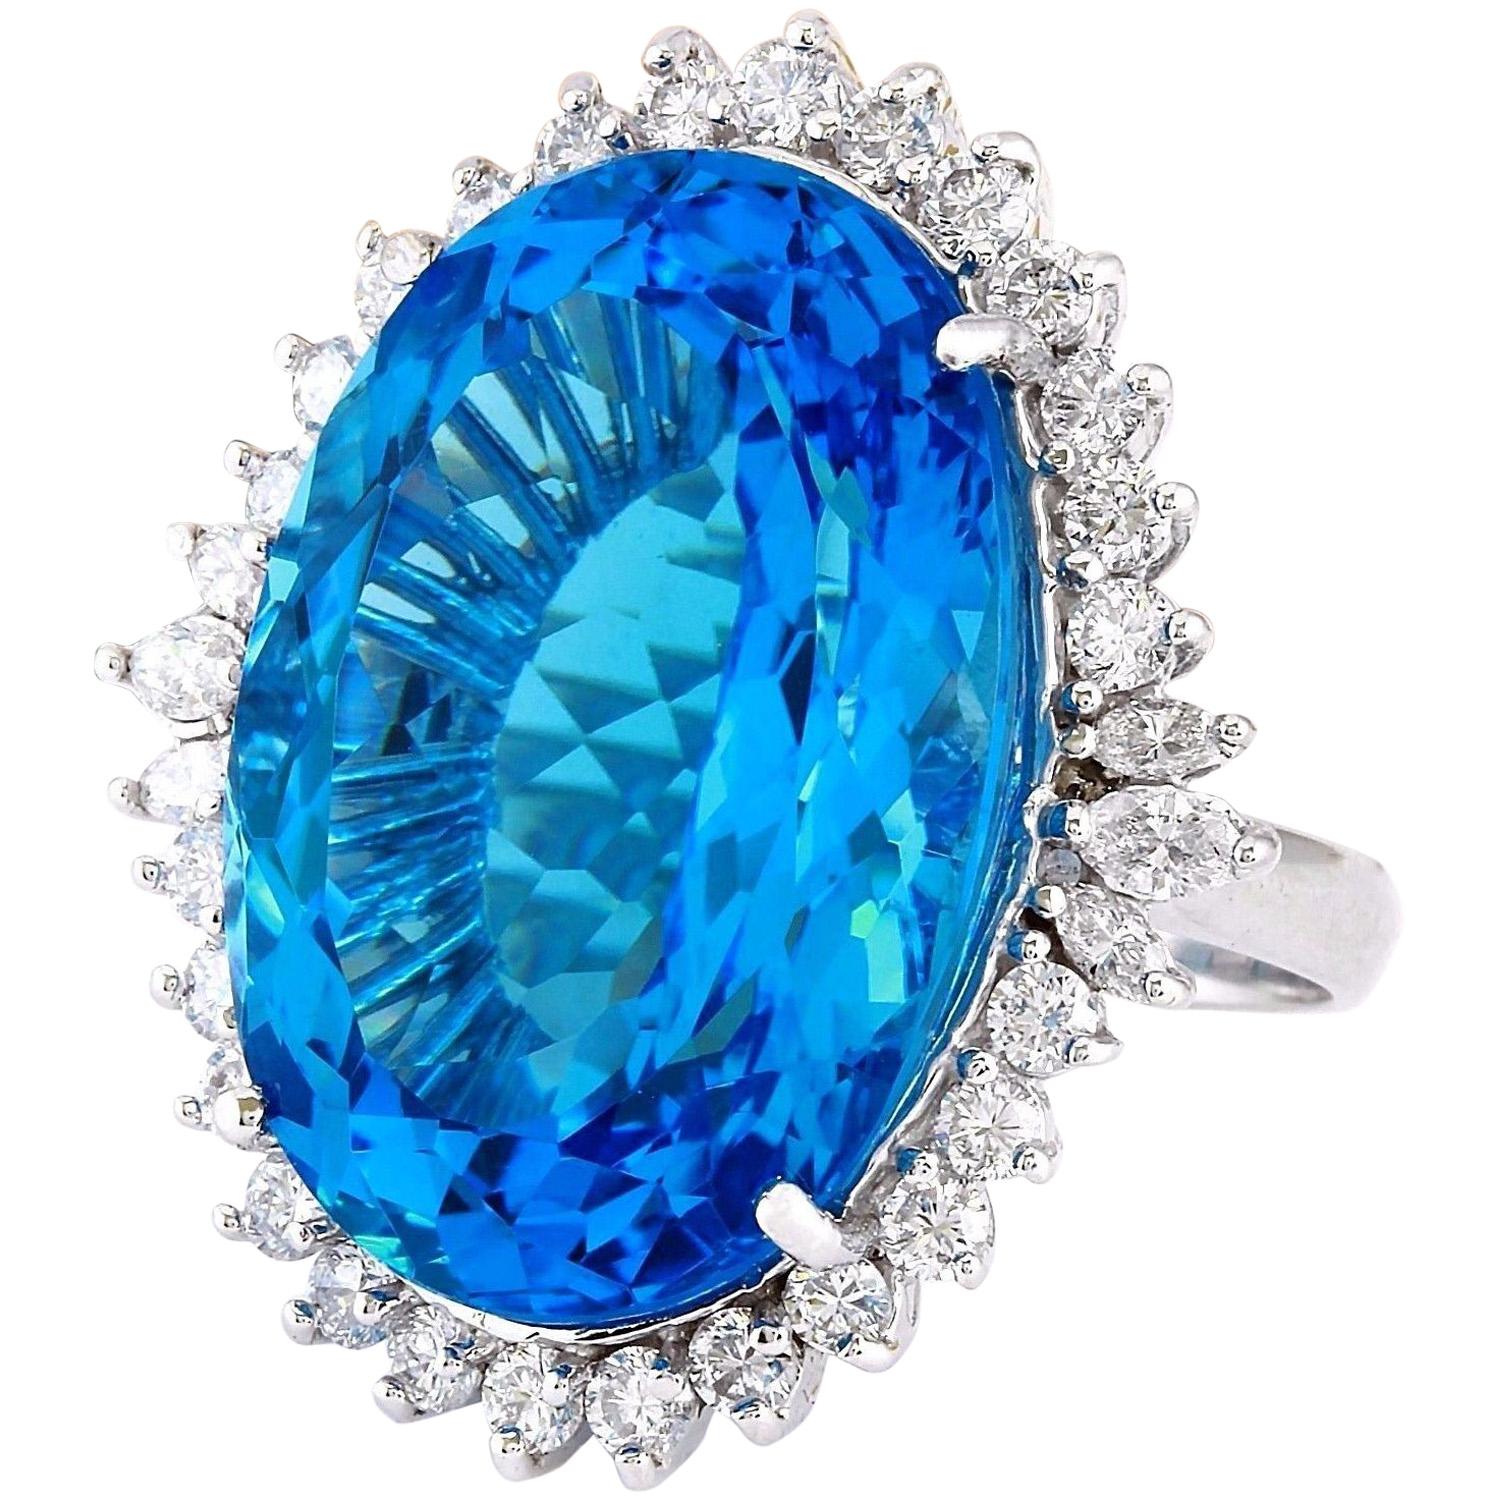 33.70 Carat Natural Topaz 14K Solid White Gold Diamond Ring
 Item Type: Ring
 Item Style: Cocktail
 Material: 14K White Gold
 Mainstone: Topaz
 Stone Color: Blue
 Stone Weight: 32.00 Carat
 Stone Shape: Oval
 Stone Quantity: 1
 Stone Dimensions: